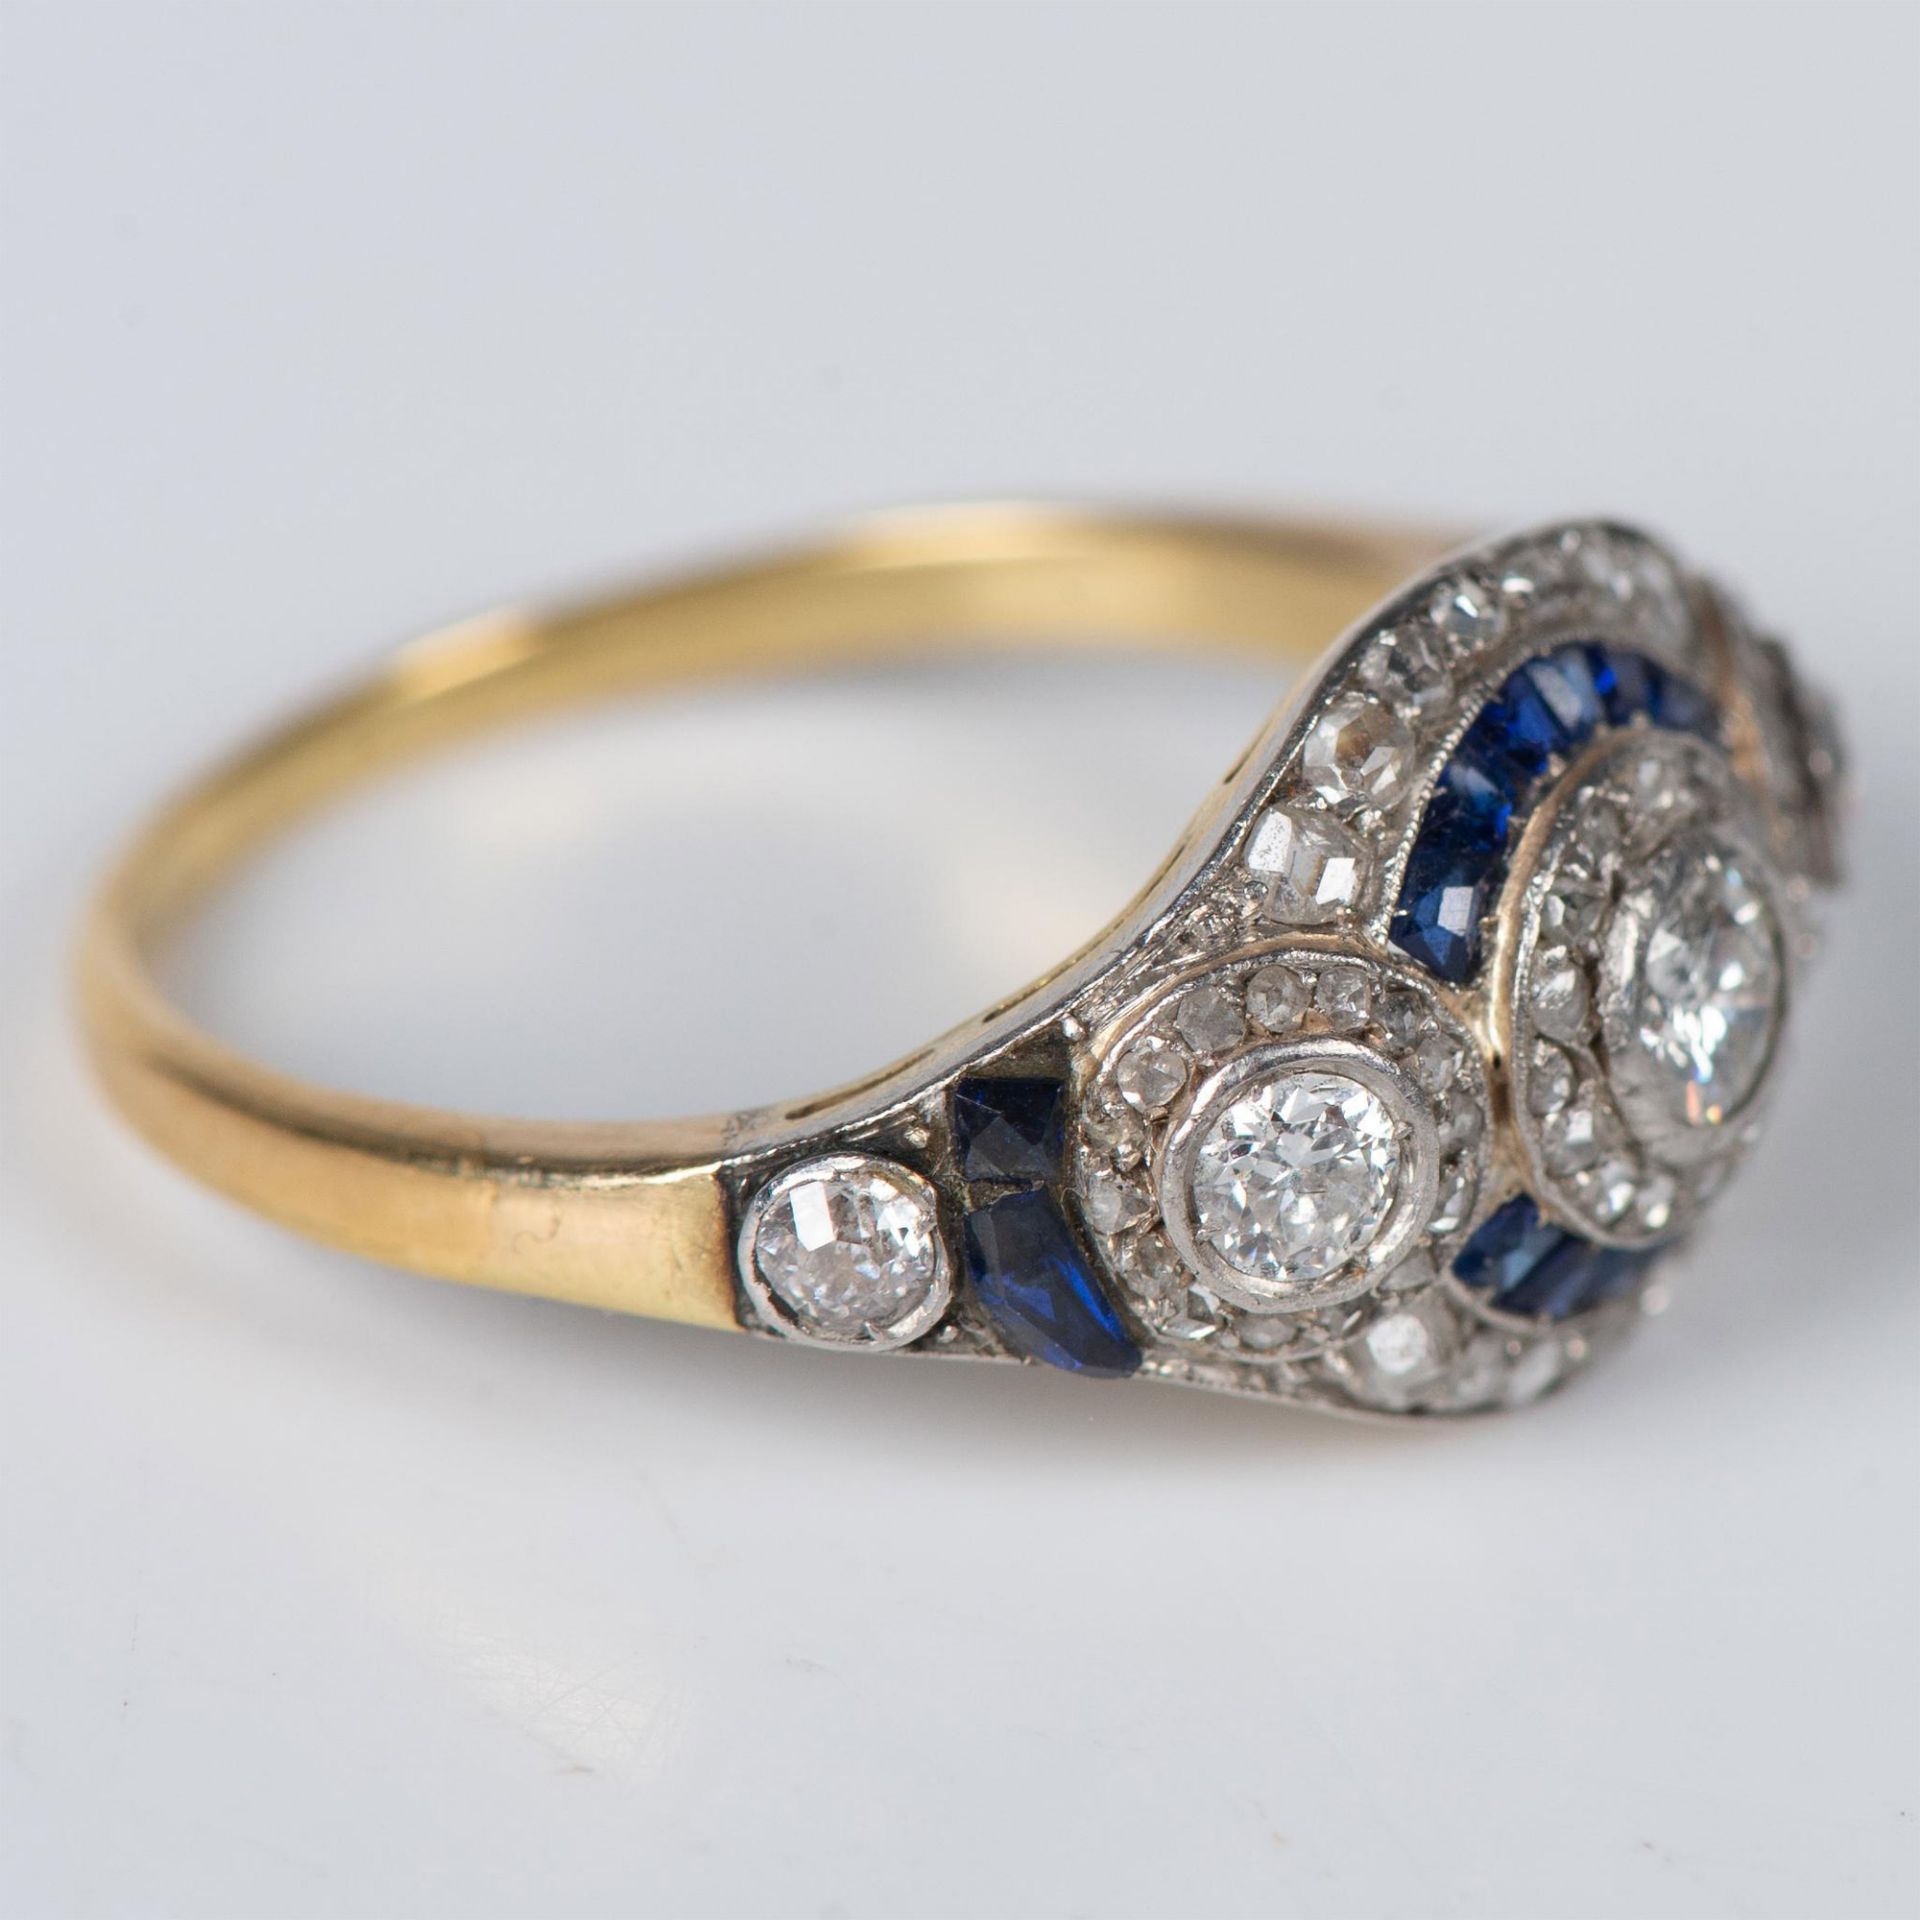 Art Deco 18K Gold, Diamonds and Sapphire Ring - Image 5 of 8